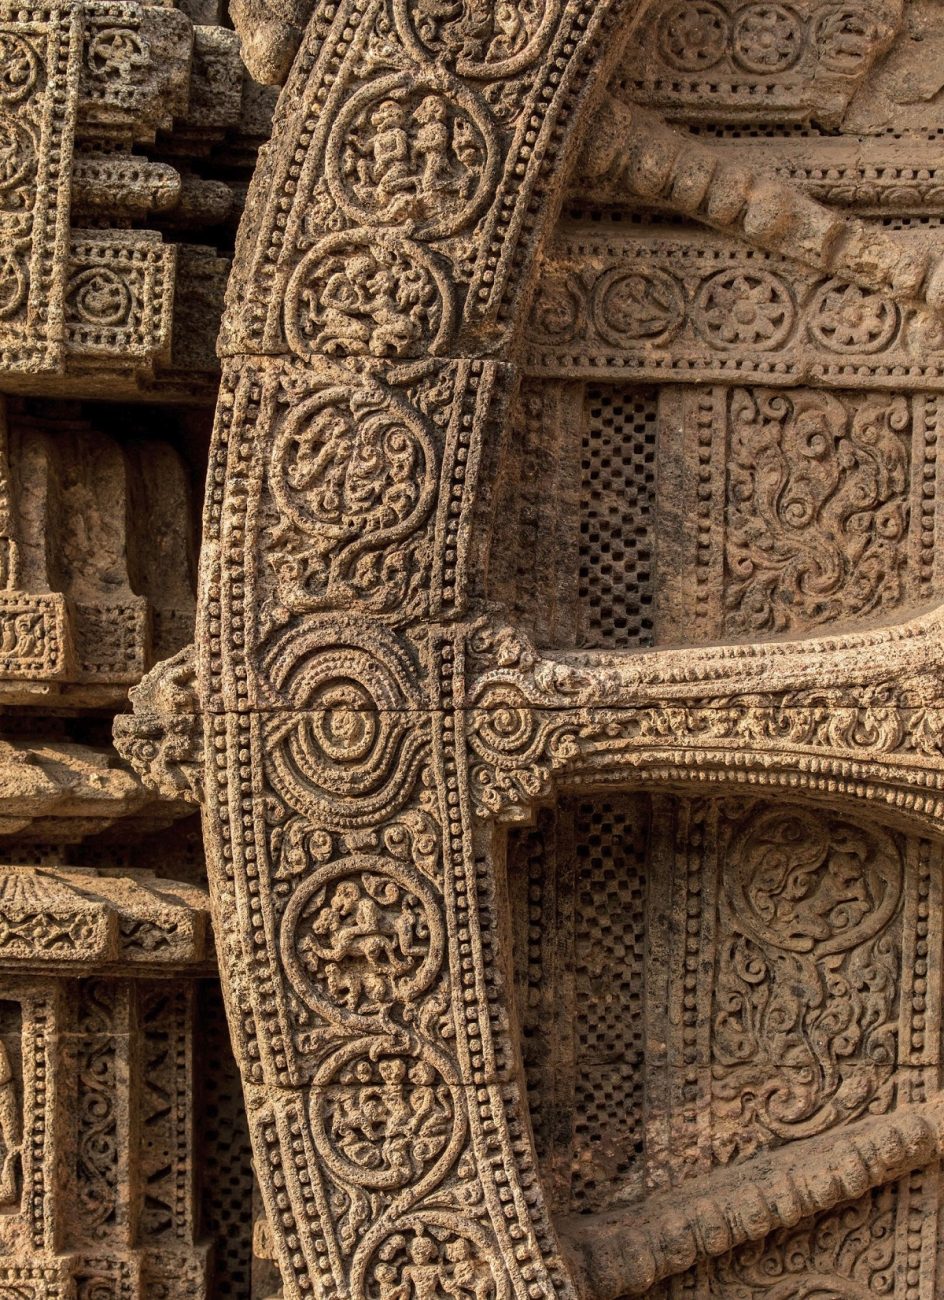 A close-up view of the Konark Sun Temple The ashlar style masonry work is also visible. Shutterstock.